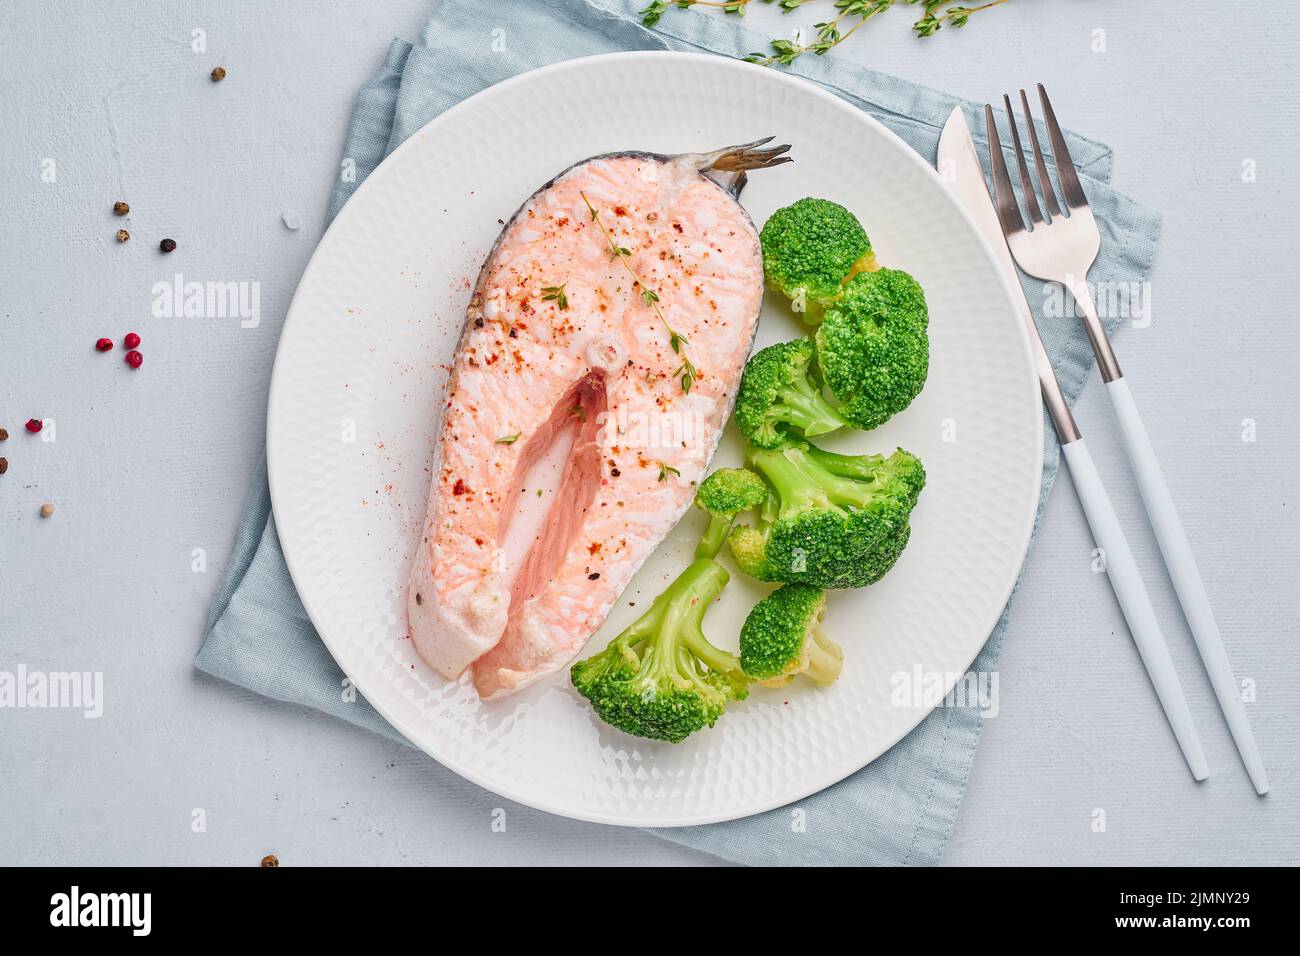 Steam salmon, broccoli, paleo, keto or fodmap diet. White plate on blue table, top view Stock Photo